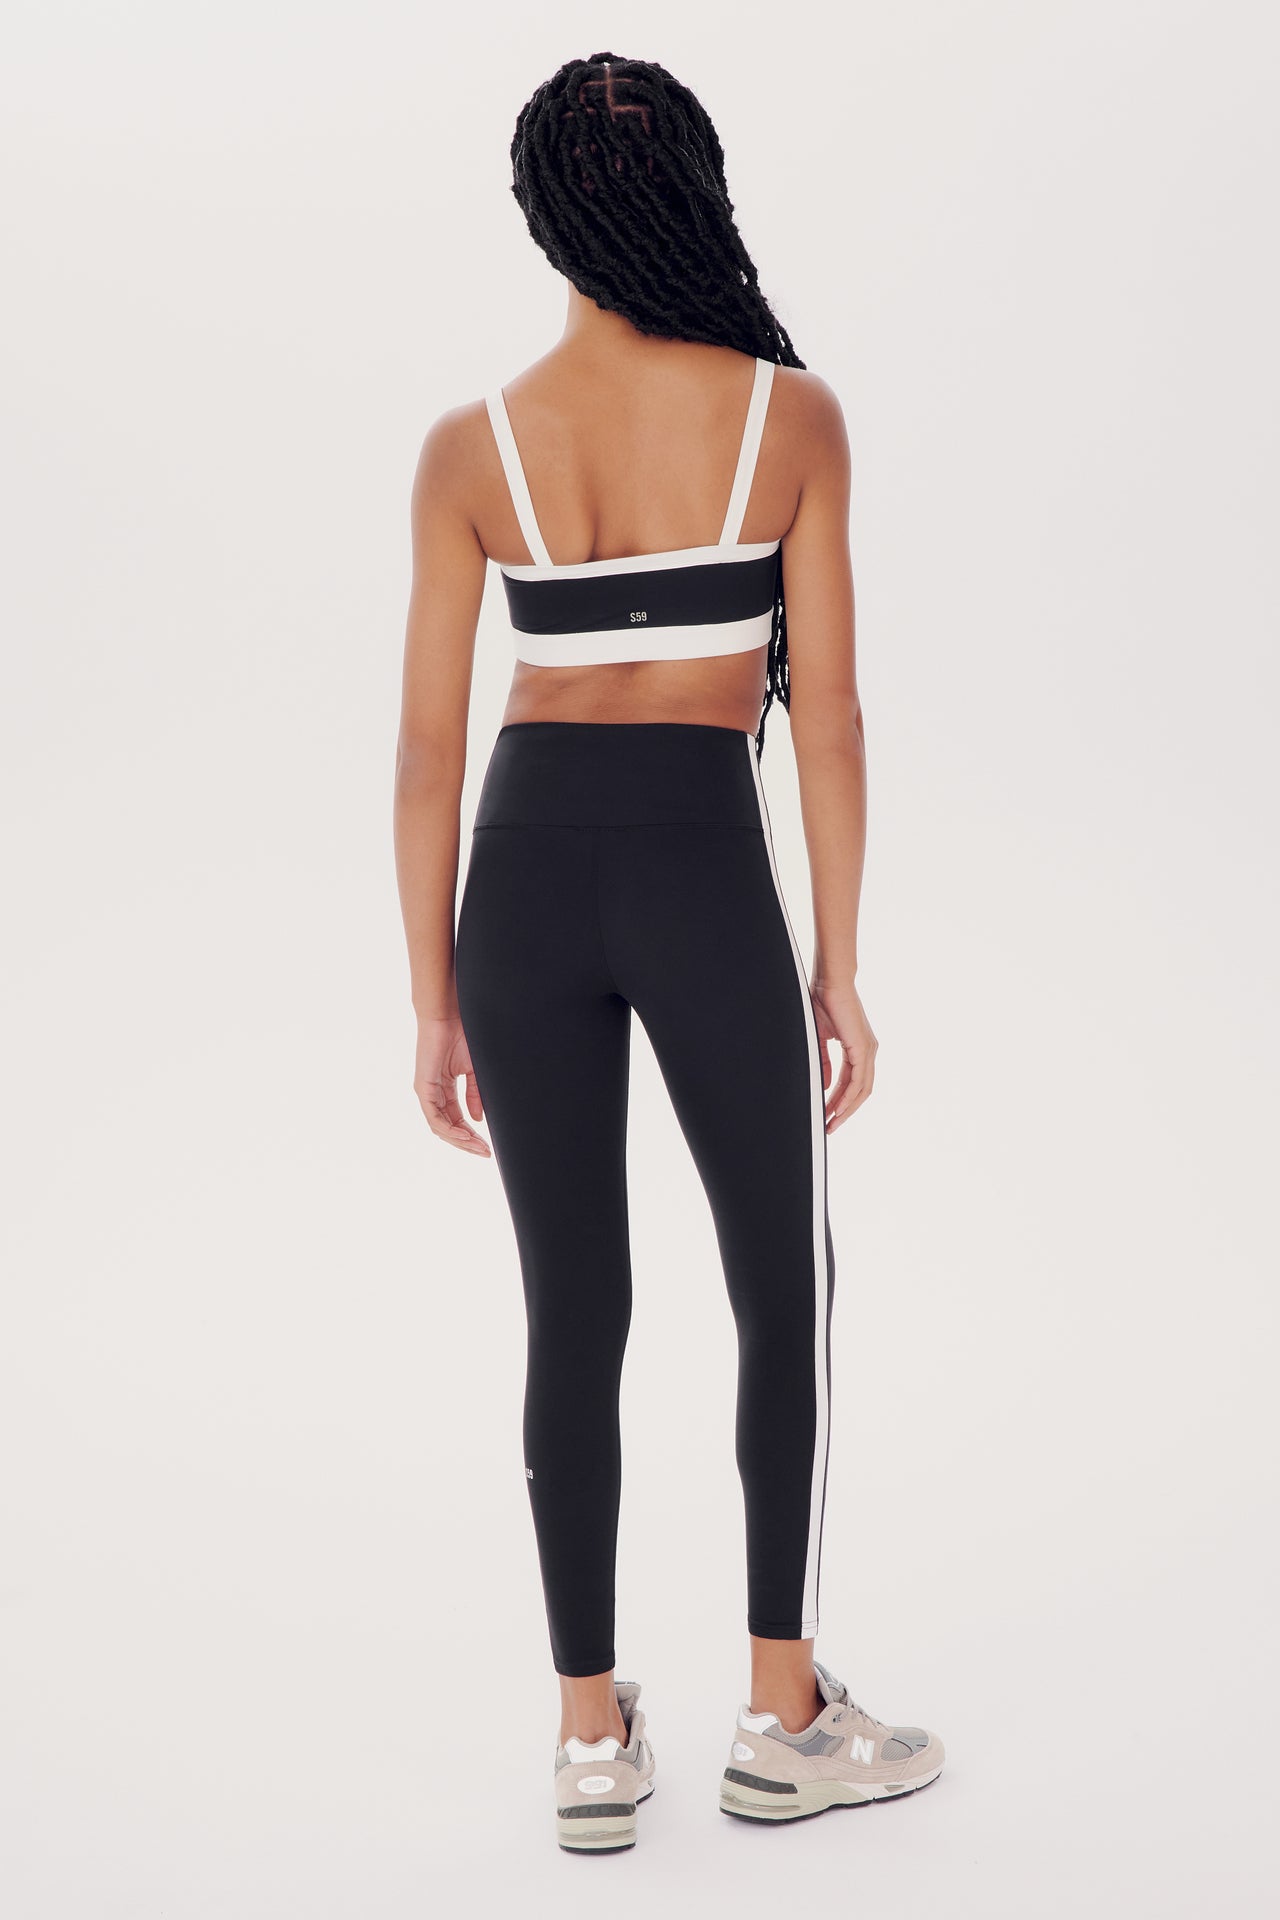 Woman standing with her back to the camera wearing a white SPLITS59 Monah Rigor Bra and black leggings with a white stripe, paired with sneakers.